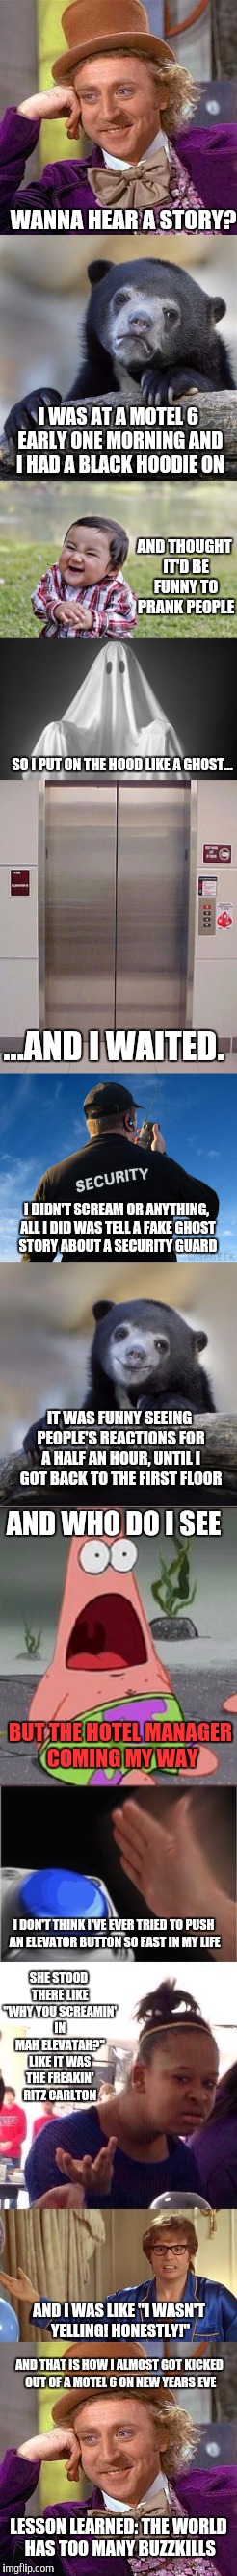 True story, I even trued to apologize for any trouble and was denied! |  WANNA HEAR A STORY? I WAS AT A MOTEL 6 EARLY ONE MORNING AND I HAD A BLACK HOODIE ON; AND THOUGHT IT'D BE FUNNY TO PRANK PEOPLE; SO I PUT ON THE HOOD LIKE A GHOST... ...AND I WAITED. I DIDN'T SCREAM OR ANYTHING, ALL I DID WAS TELL A FAKE GHOST STORY ABOUT A SECURITY GUARD; IT WAS FUNNY SEEING PEOPLE'S REACTIONS FOR A HALF AN HOUR, UNTIL I GOT BACK TO THE FIRST FLOOR; AND WHO DO I SEE; BUT THE HOTEL MANAGER COMING MY WAY; I DON'T THINK I'VE EVER TRIED TO PUSH AN ELEVATOR BUTTON SO FAST IN MY LIFE; SHE STOOD THERE LIKE "WHY YOU SCREAMIN' IN MAH ELEVATAH?" LIKE IT WAS THE FREAKIN' RITZ CARLTON; AND I WAS LIKE "I WASN'T YELLING! HONESTLY!"; AND THAT IS HOW I ALMOST GOT KICKED OUT OF A MOTEL 6 ON NEW YEARS EVE; LESSON LEARNED: THE WORLD HAS TOO MANY BUZZKILLS | image tagged in creepy condescending wonka,confession bear,evil toddler,suprised patrick,black girl wat,austin powers honestly | made w/ Imgflip meme maker